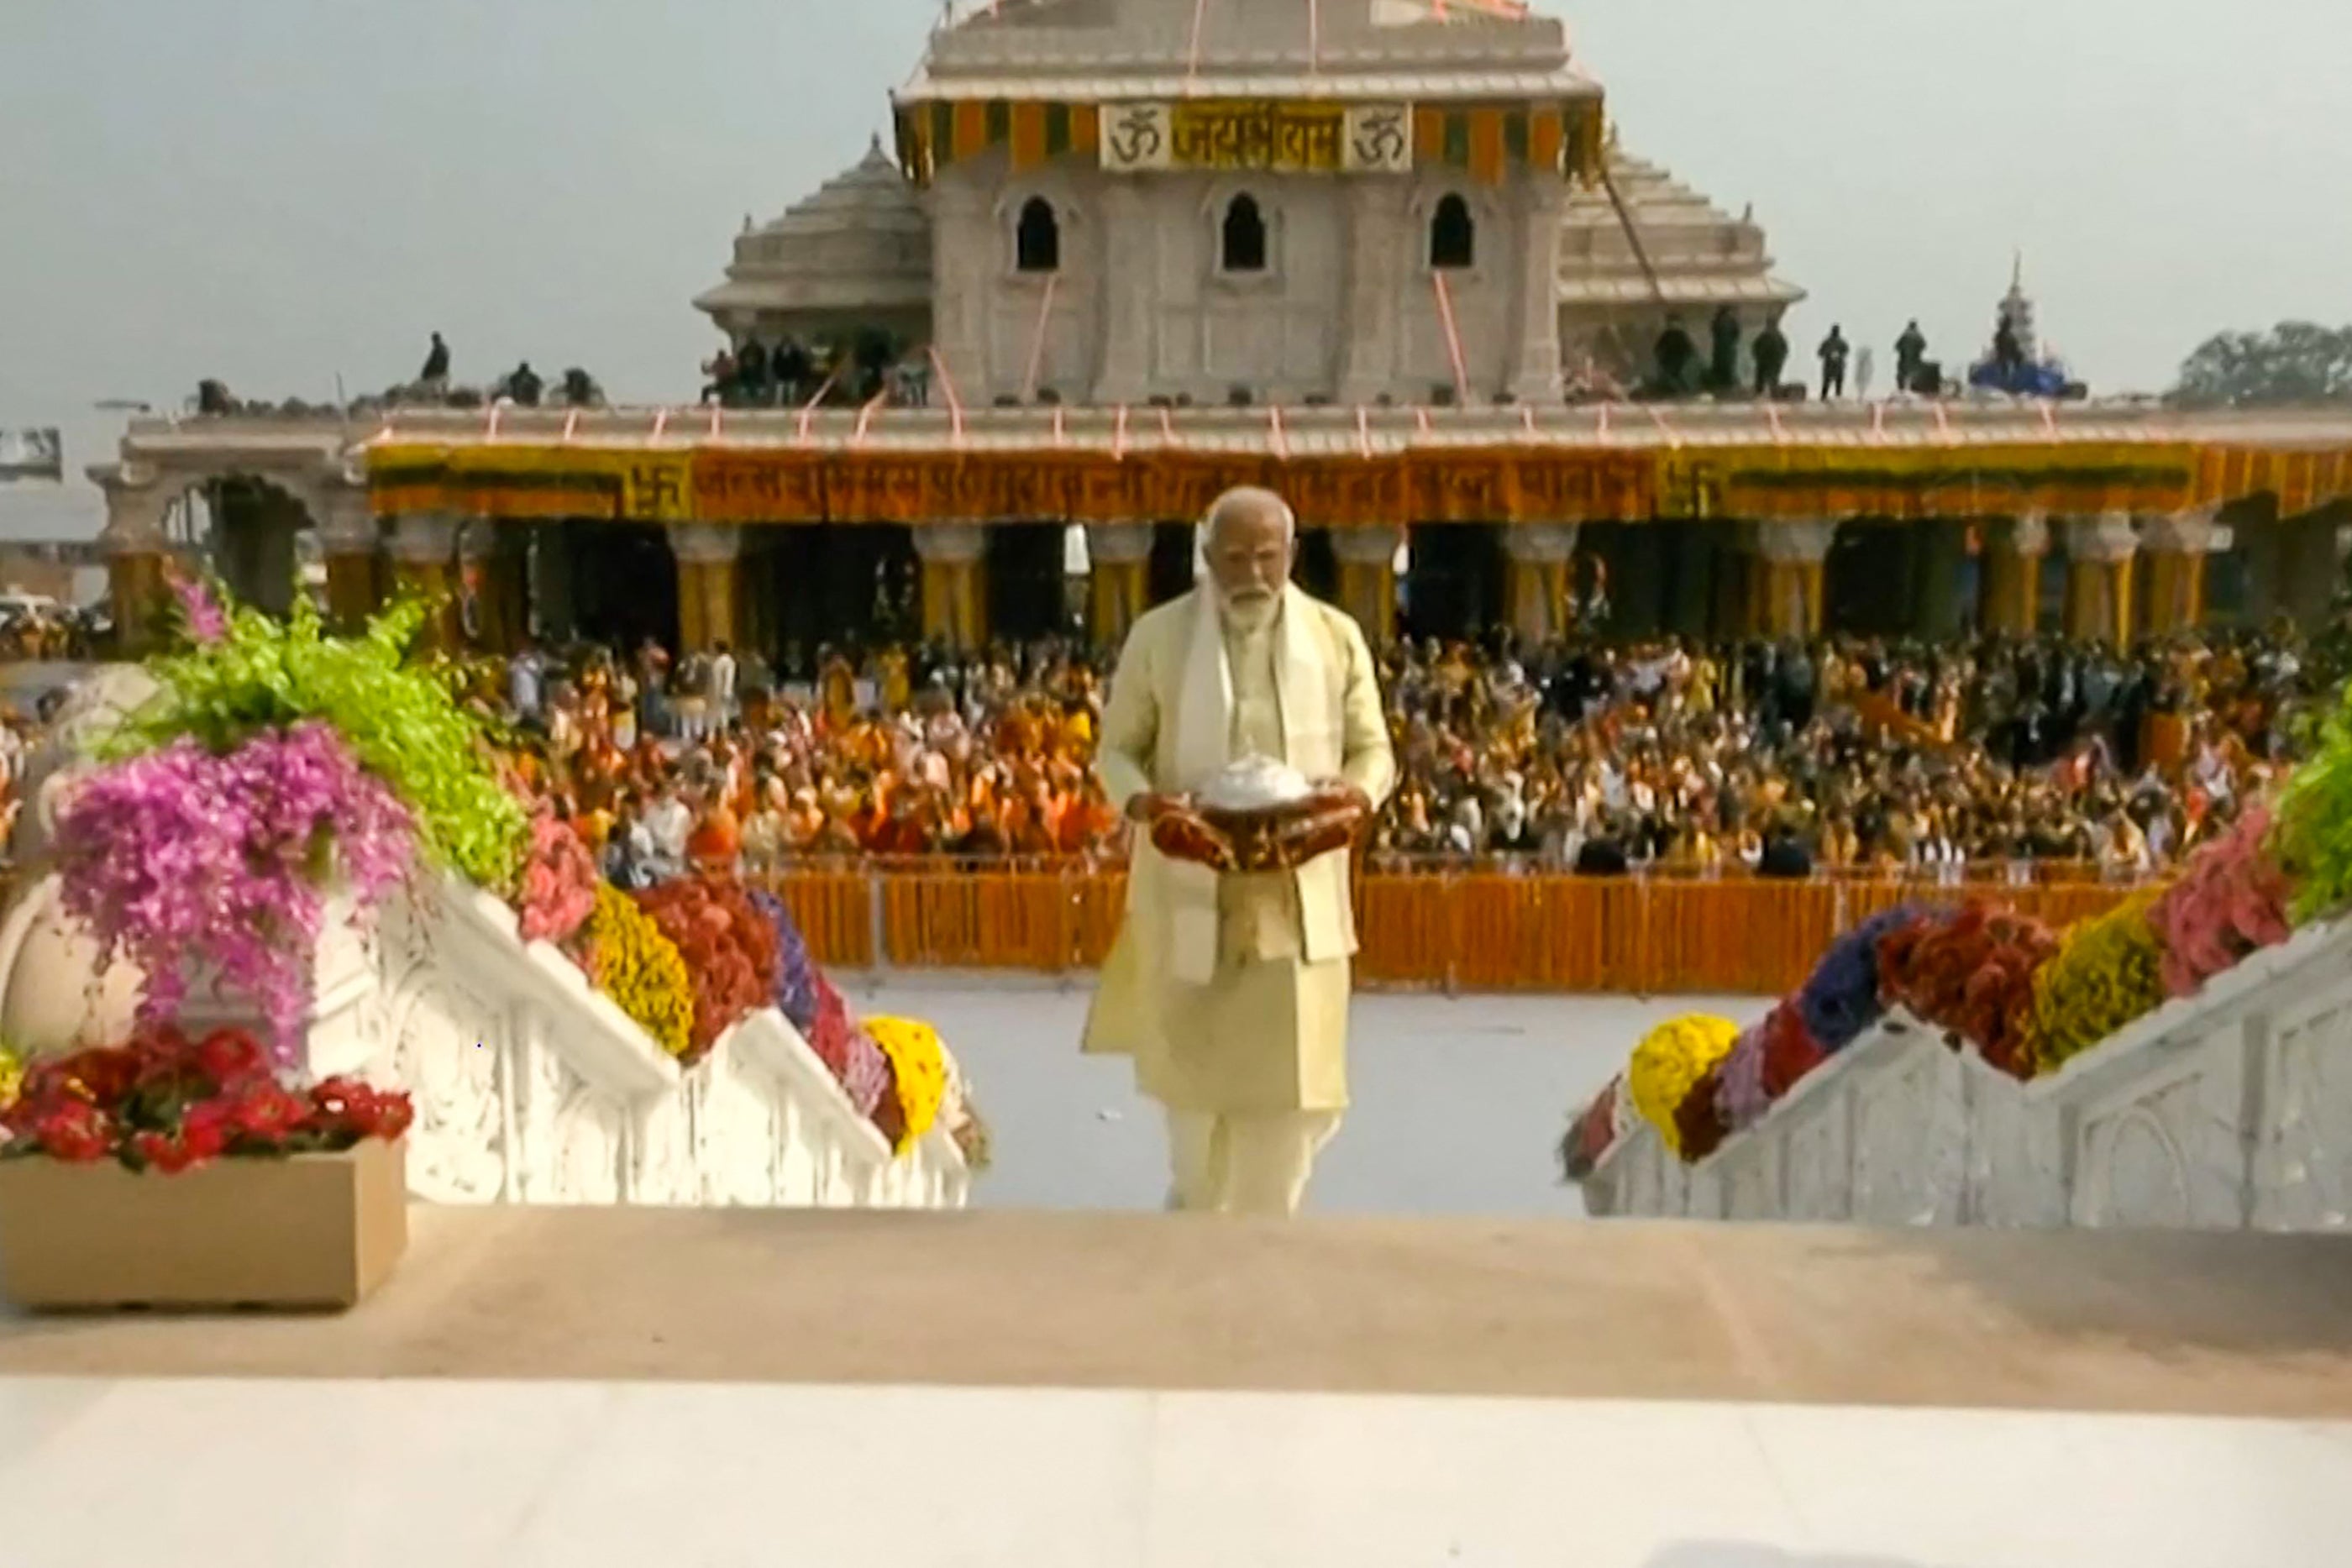 India’s Prime Minister Narendra Modi walking up the stairs to officially consecrate the Ram temple in Ayodhya (screengrab)